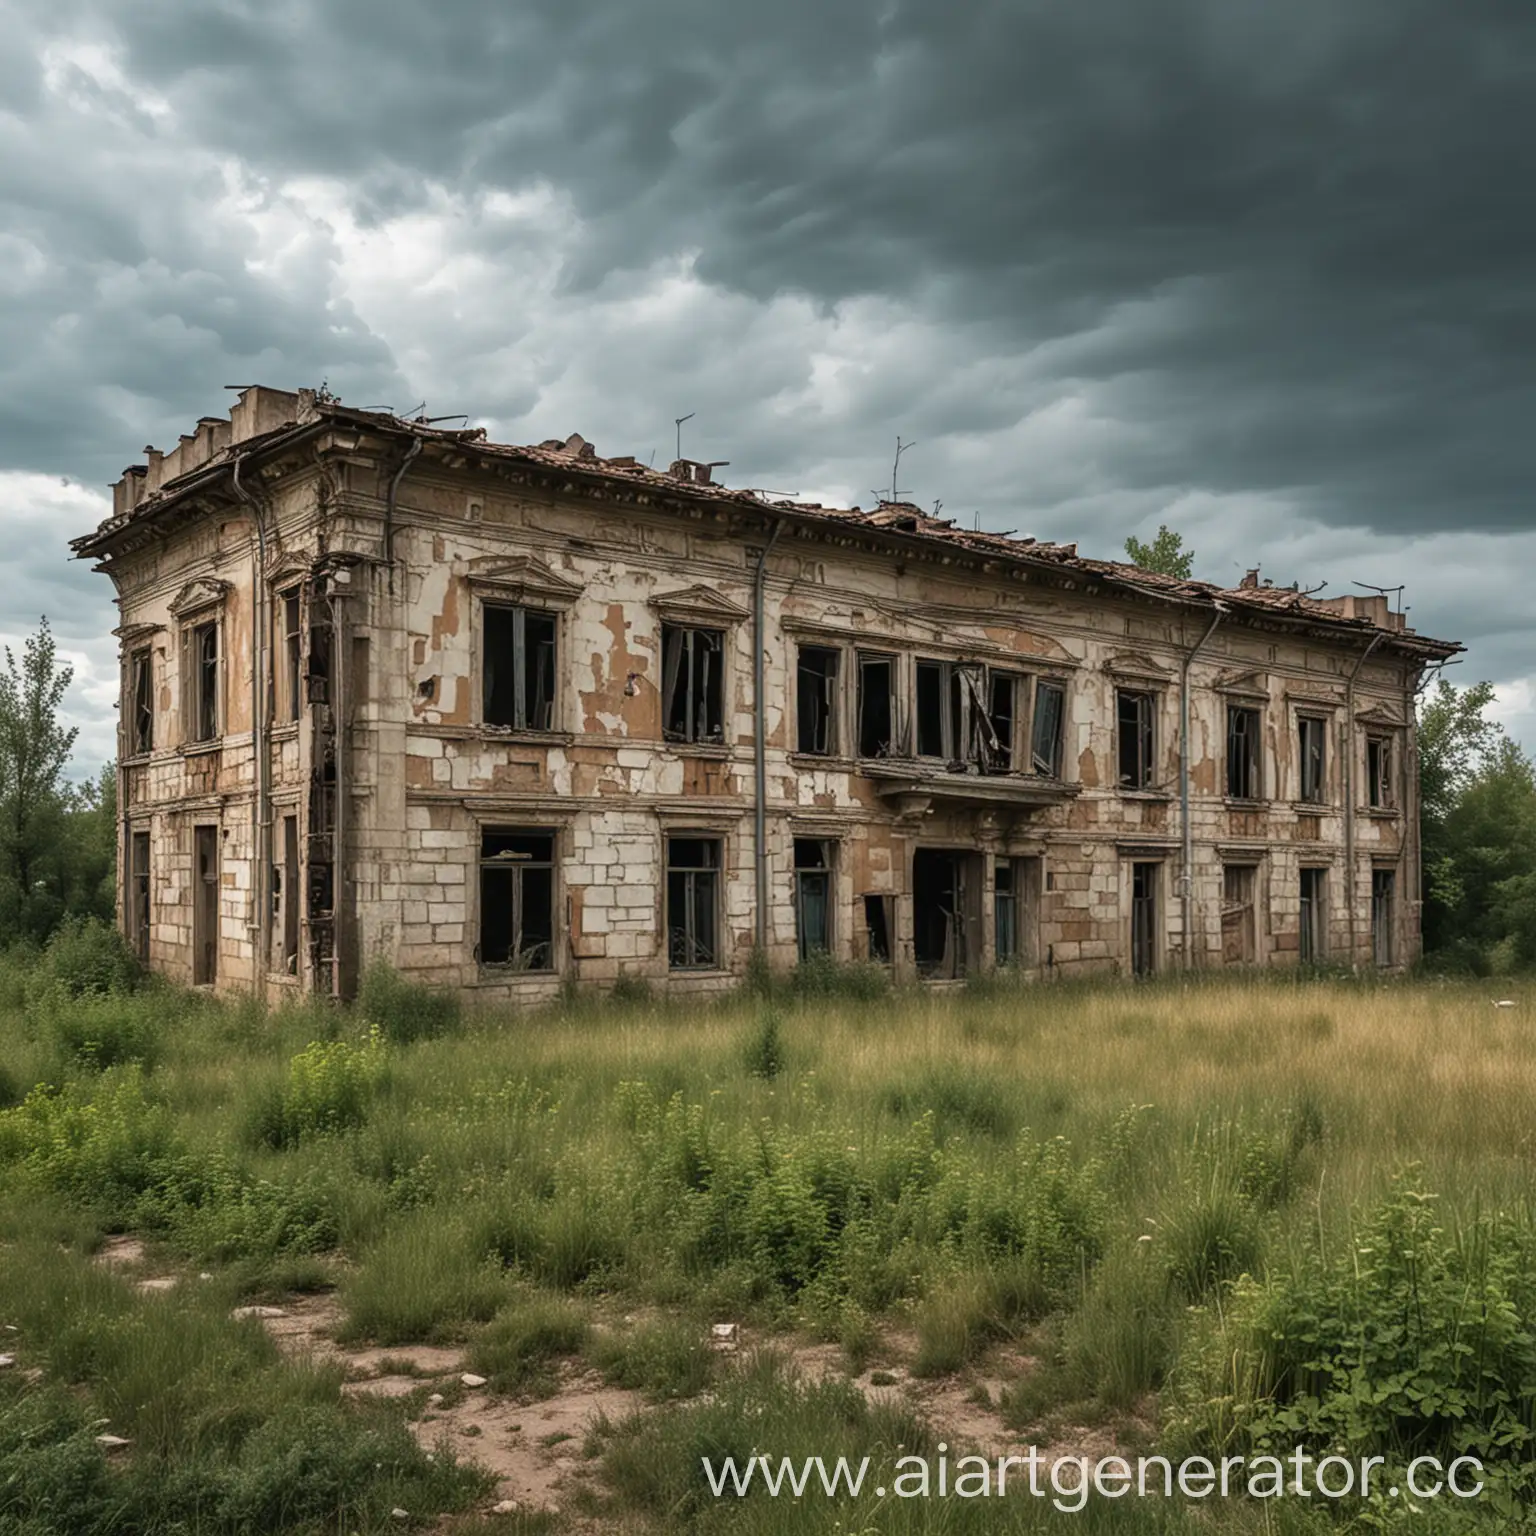 Guarding-an-Old-Abandoned-City-Building-on-the-Outskirts